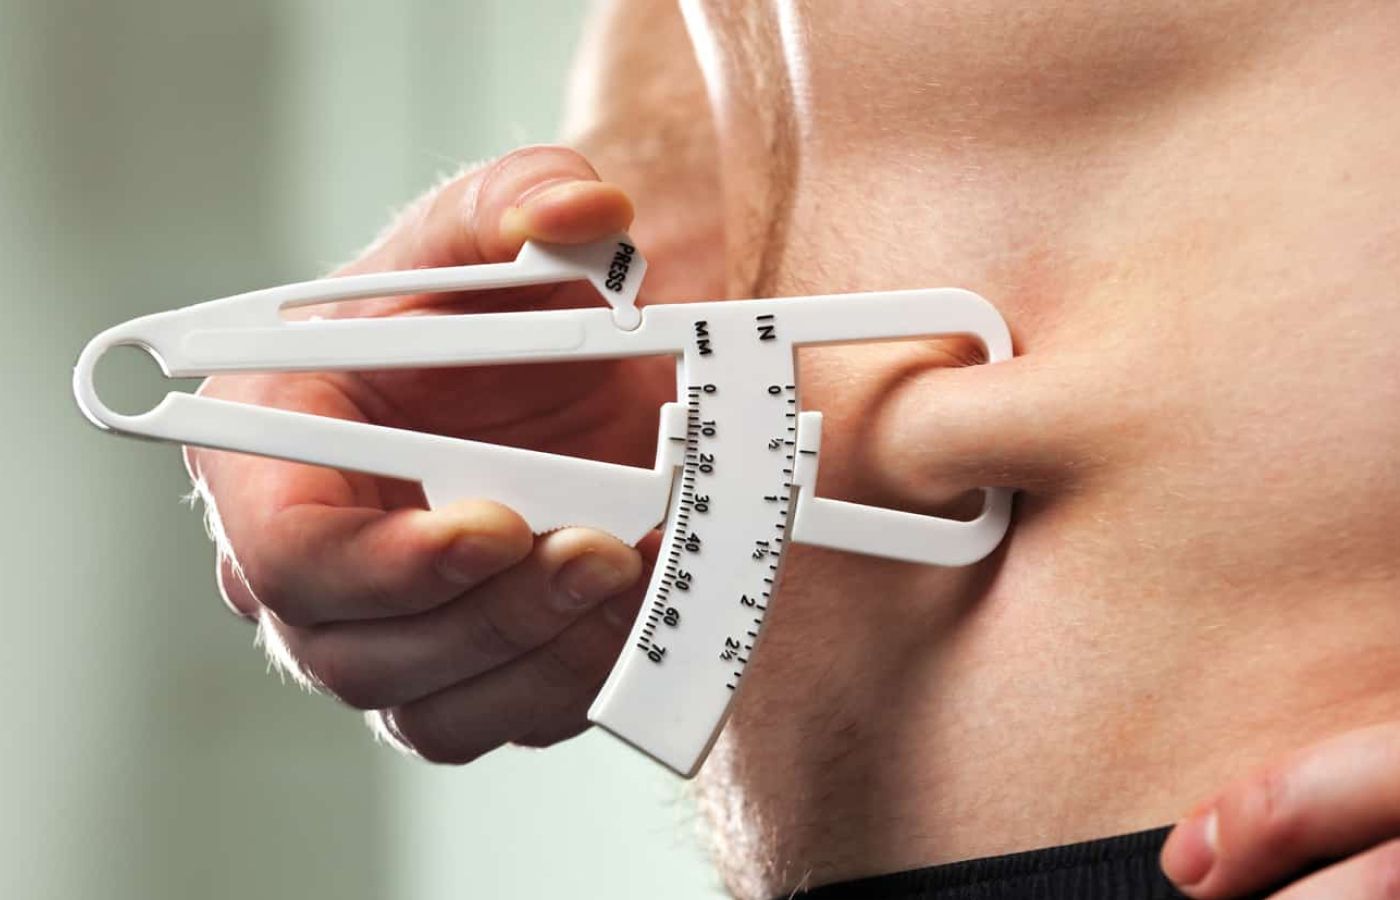 6 Common Ways for Measuring Body Fat